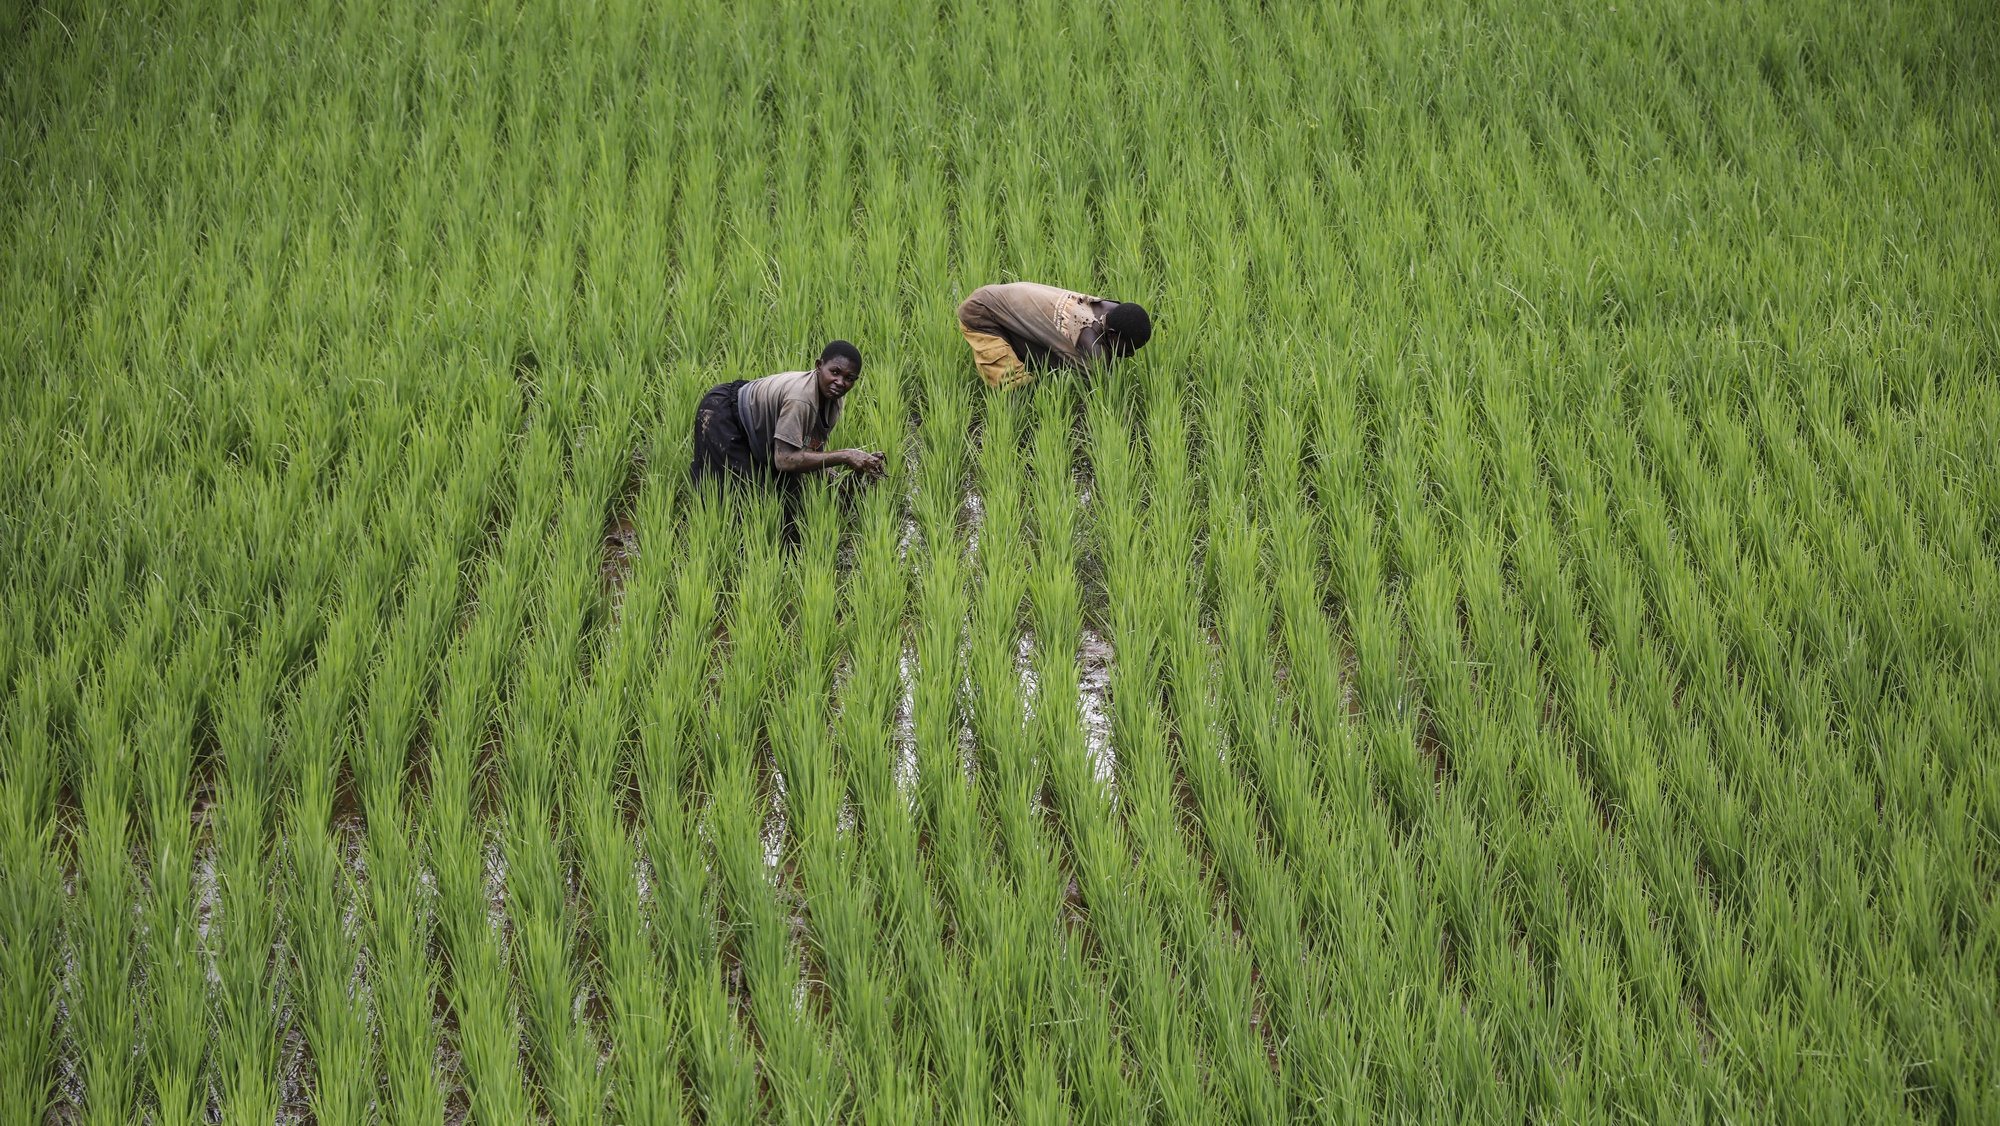 epa07487231 Farmers work in a rice field near Kayonza, eastern Rwanda, 05 April 2019. Agriculture is the main economic activity in Rwanda with 70 per cent of the population engaged in the sector, and around 72 per cent of the working population employed in agriculture. Rwanda exports dry beans, potatoes, maize, rice, cassava flour, maize flour, poultry and live animals within Eastern Africa.  EPA/DAI KUROKAWA